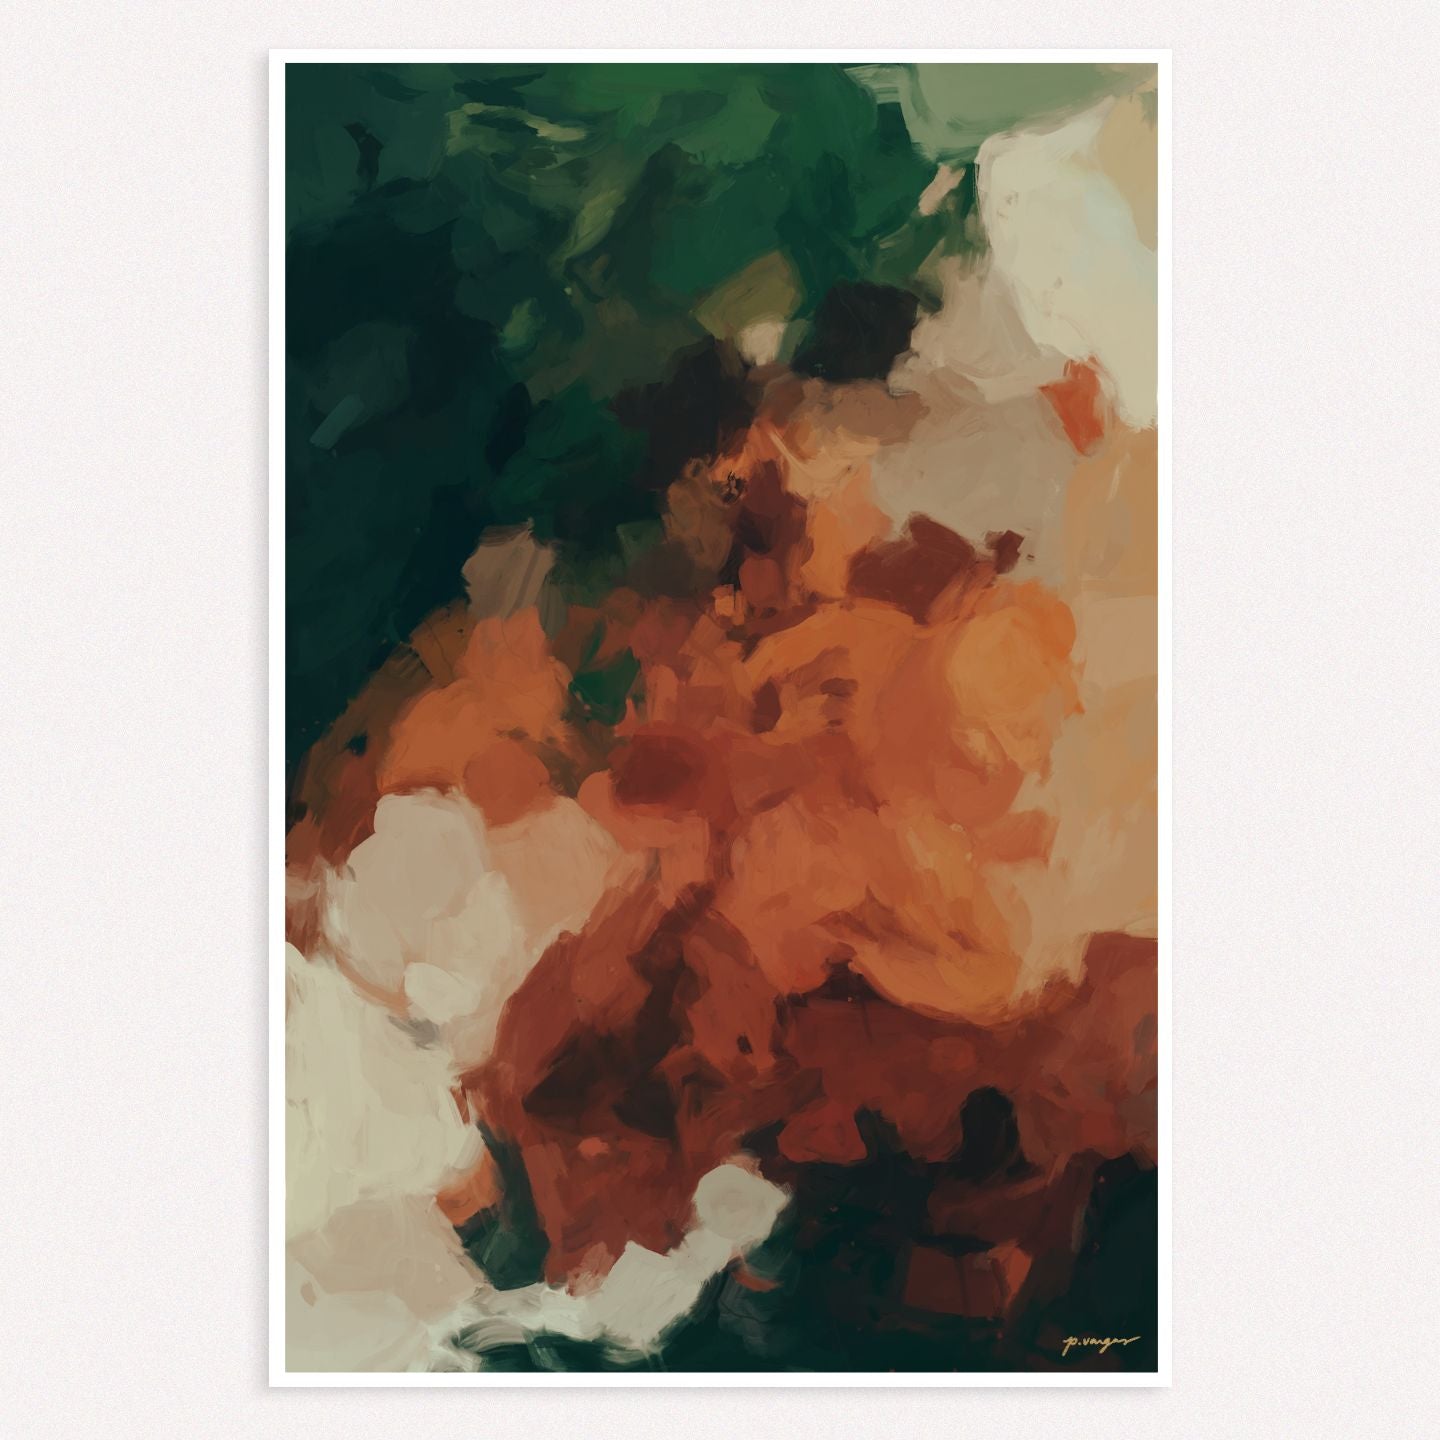 Cedar, green and brown colorful abstract wall art print by Parima Studio